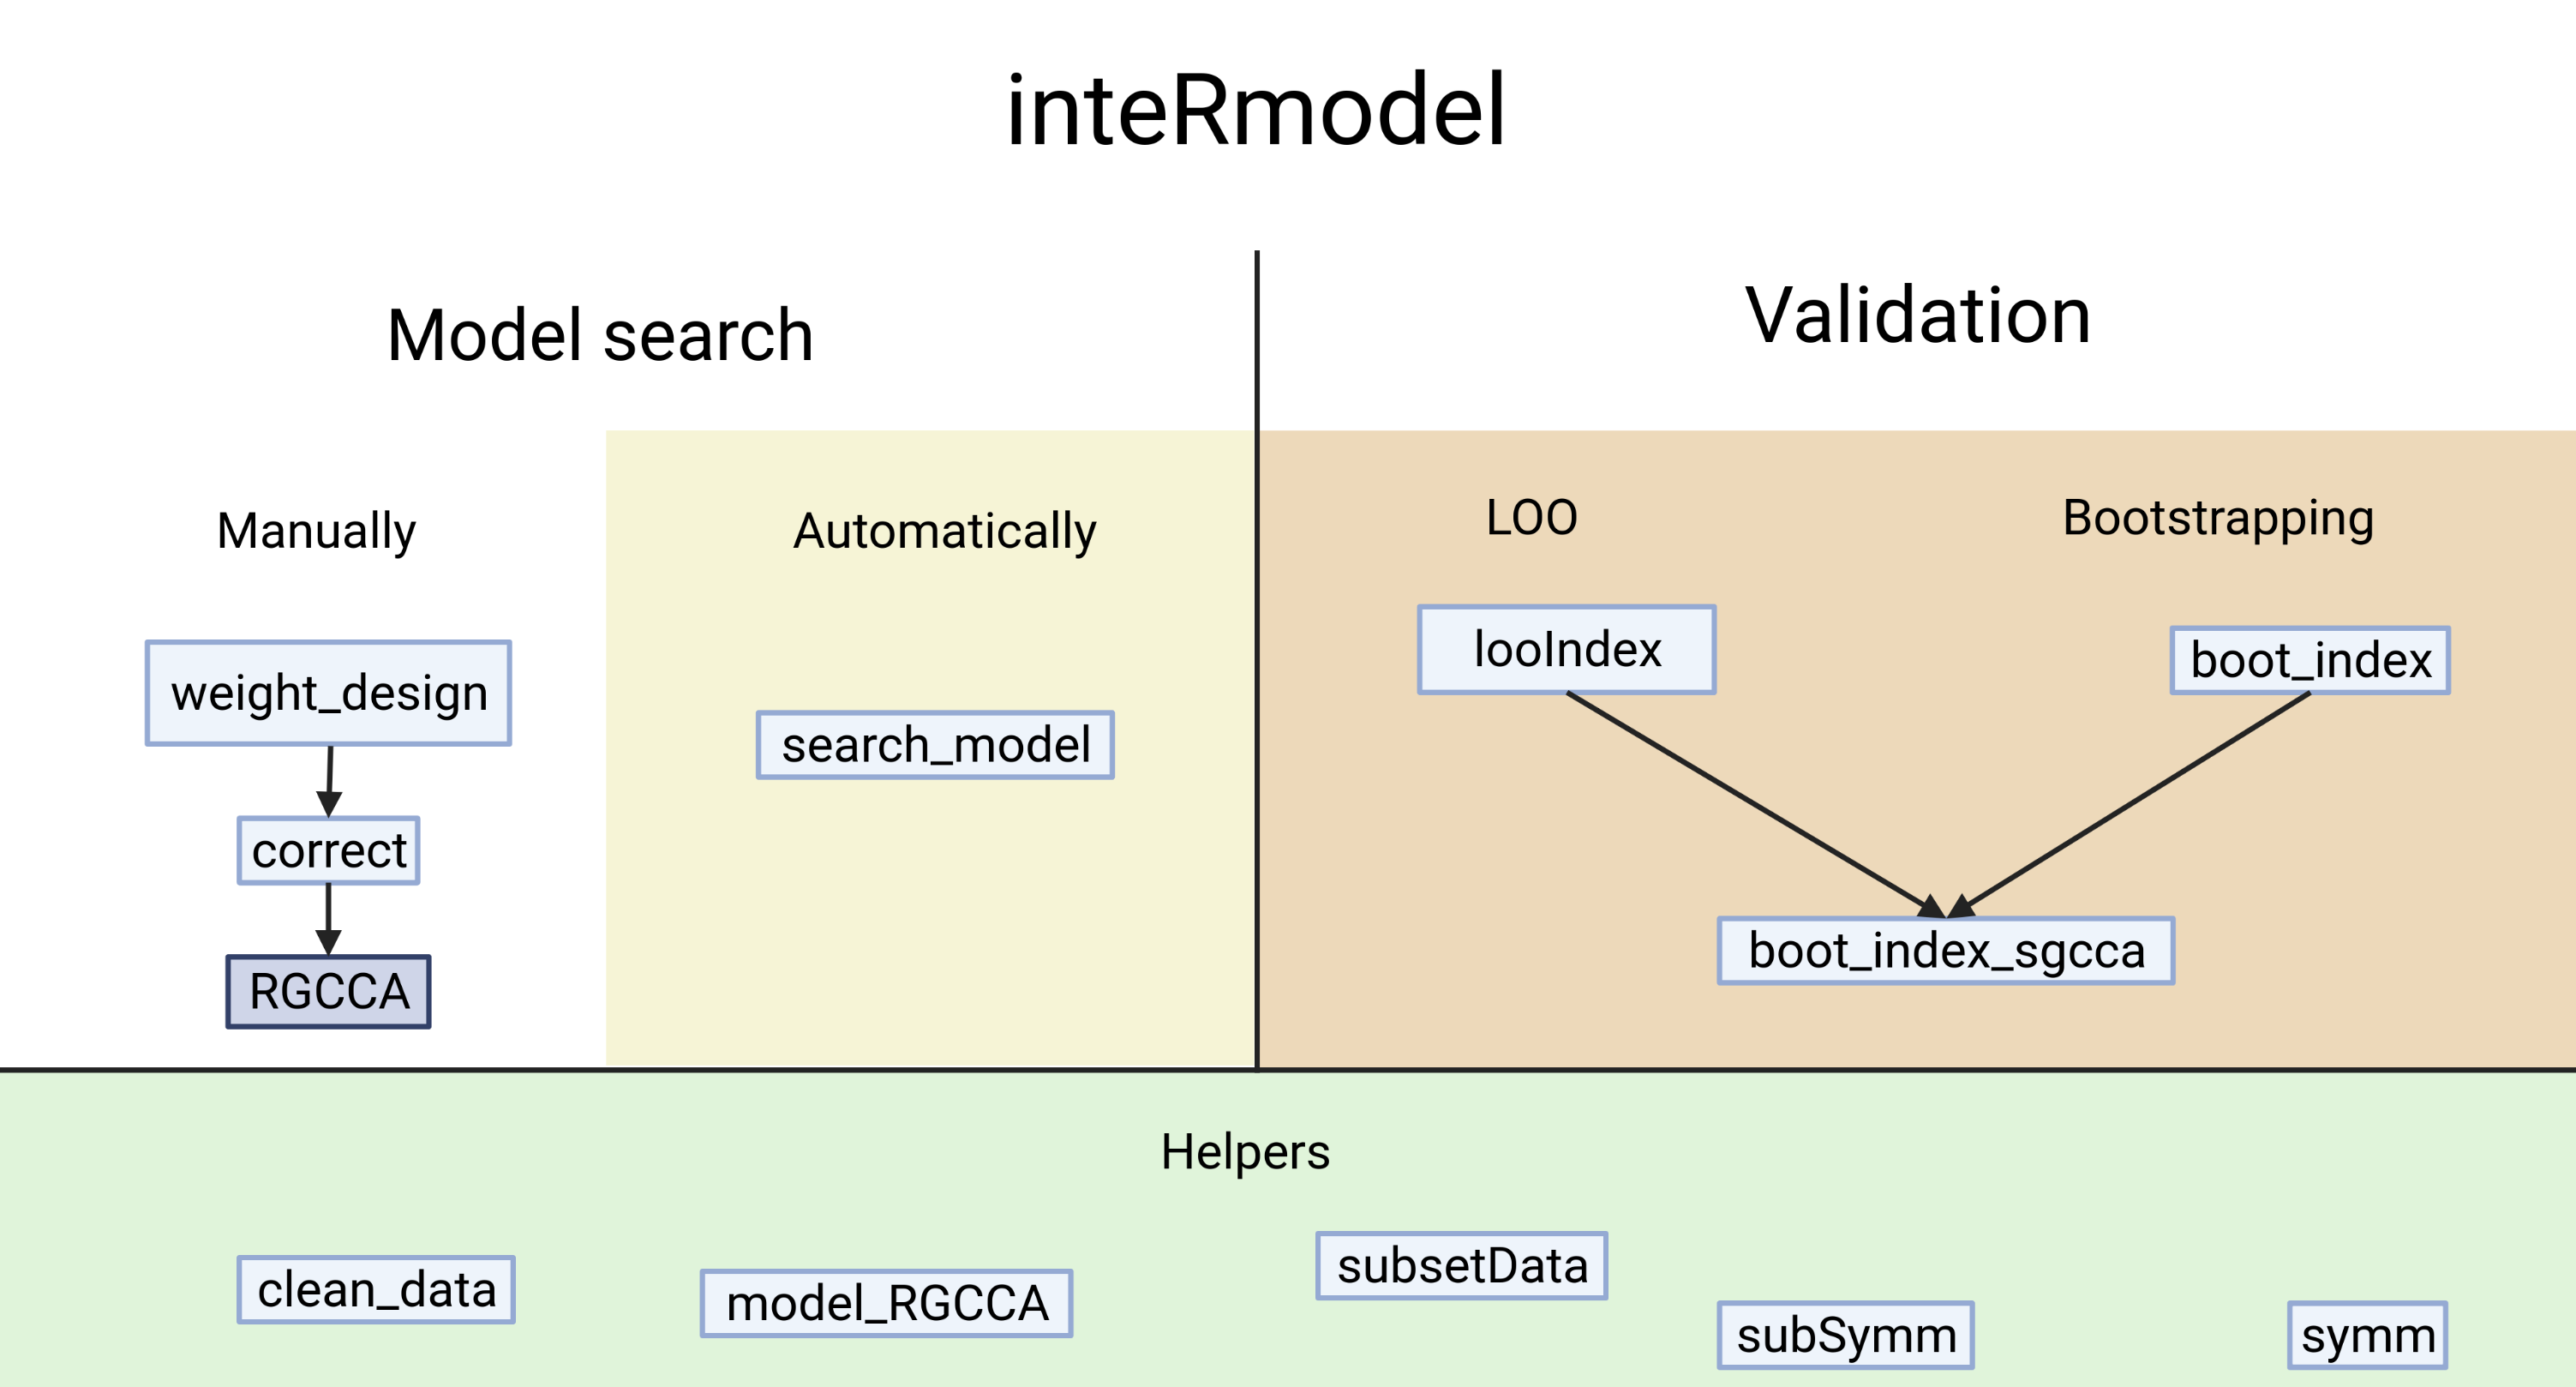 `inteRmodel` functions and workflow. Functions provided by the inteRmodel package to help on the process, search and validate models of relationships using RGCCA. Created with BioRender.com